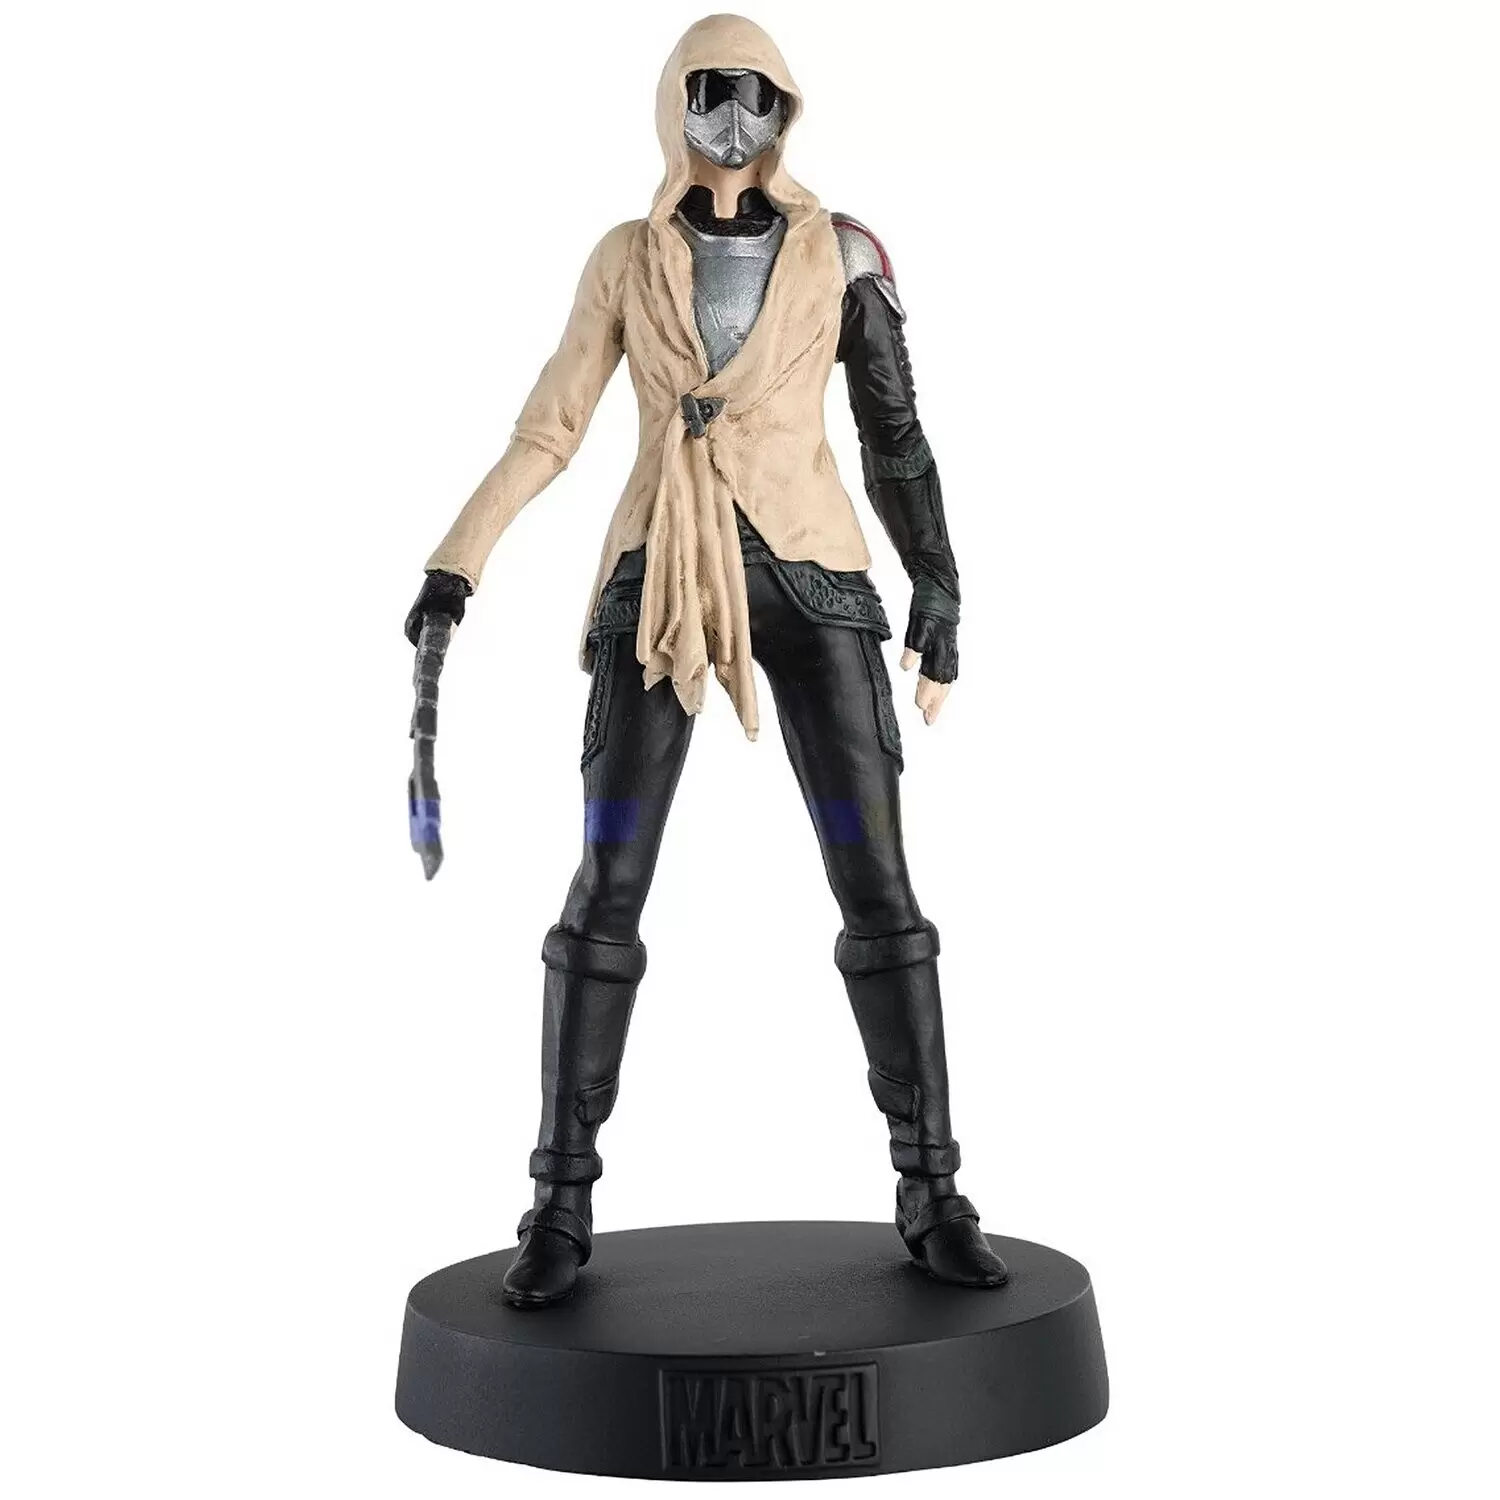 Figurines des films Marvel - Original Wasp Figurine (Ant-Man and the Wasp)